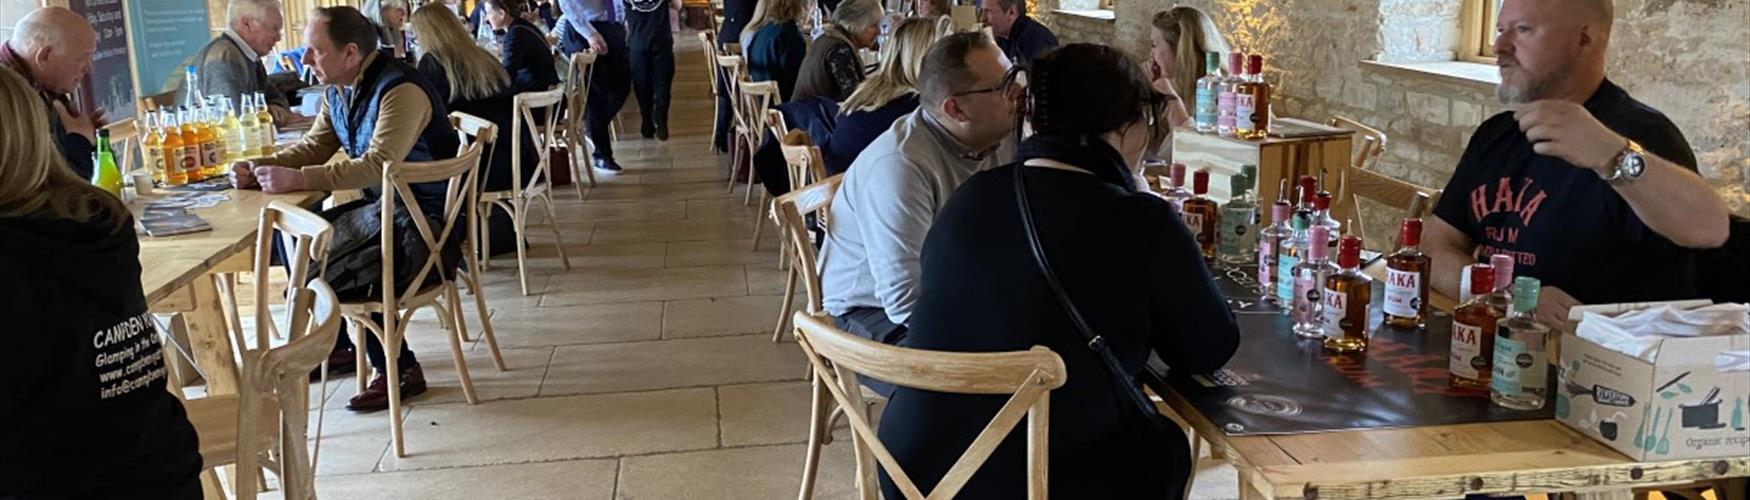 Speed dating at the Local Connections event, March 2023